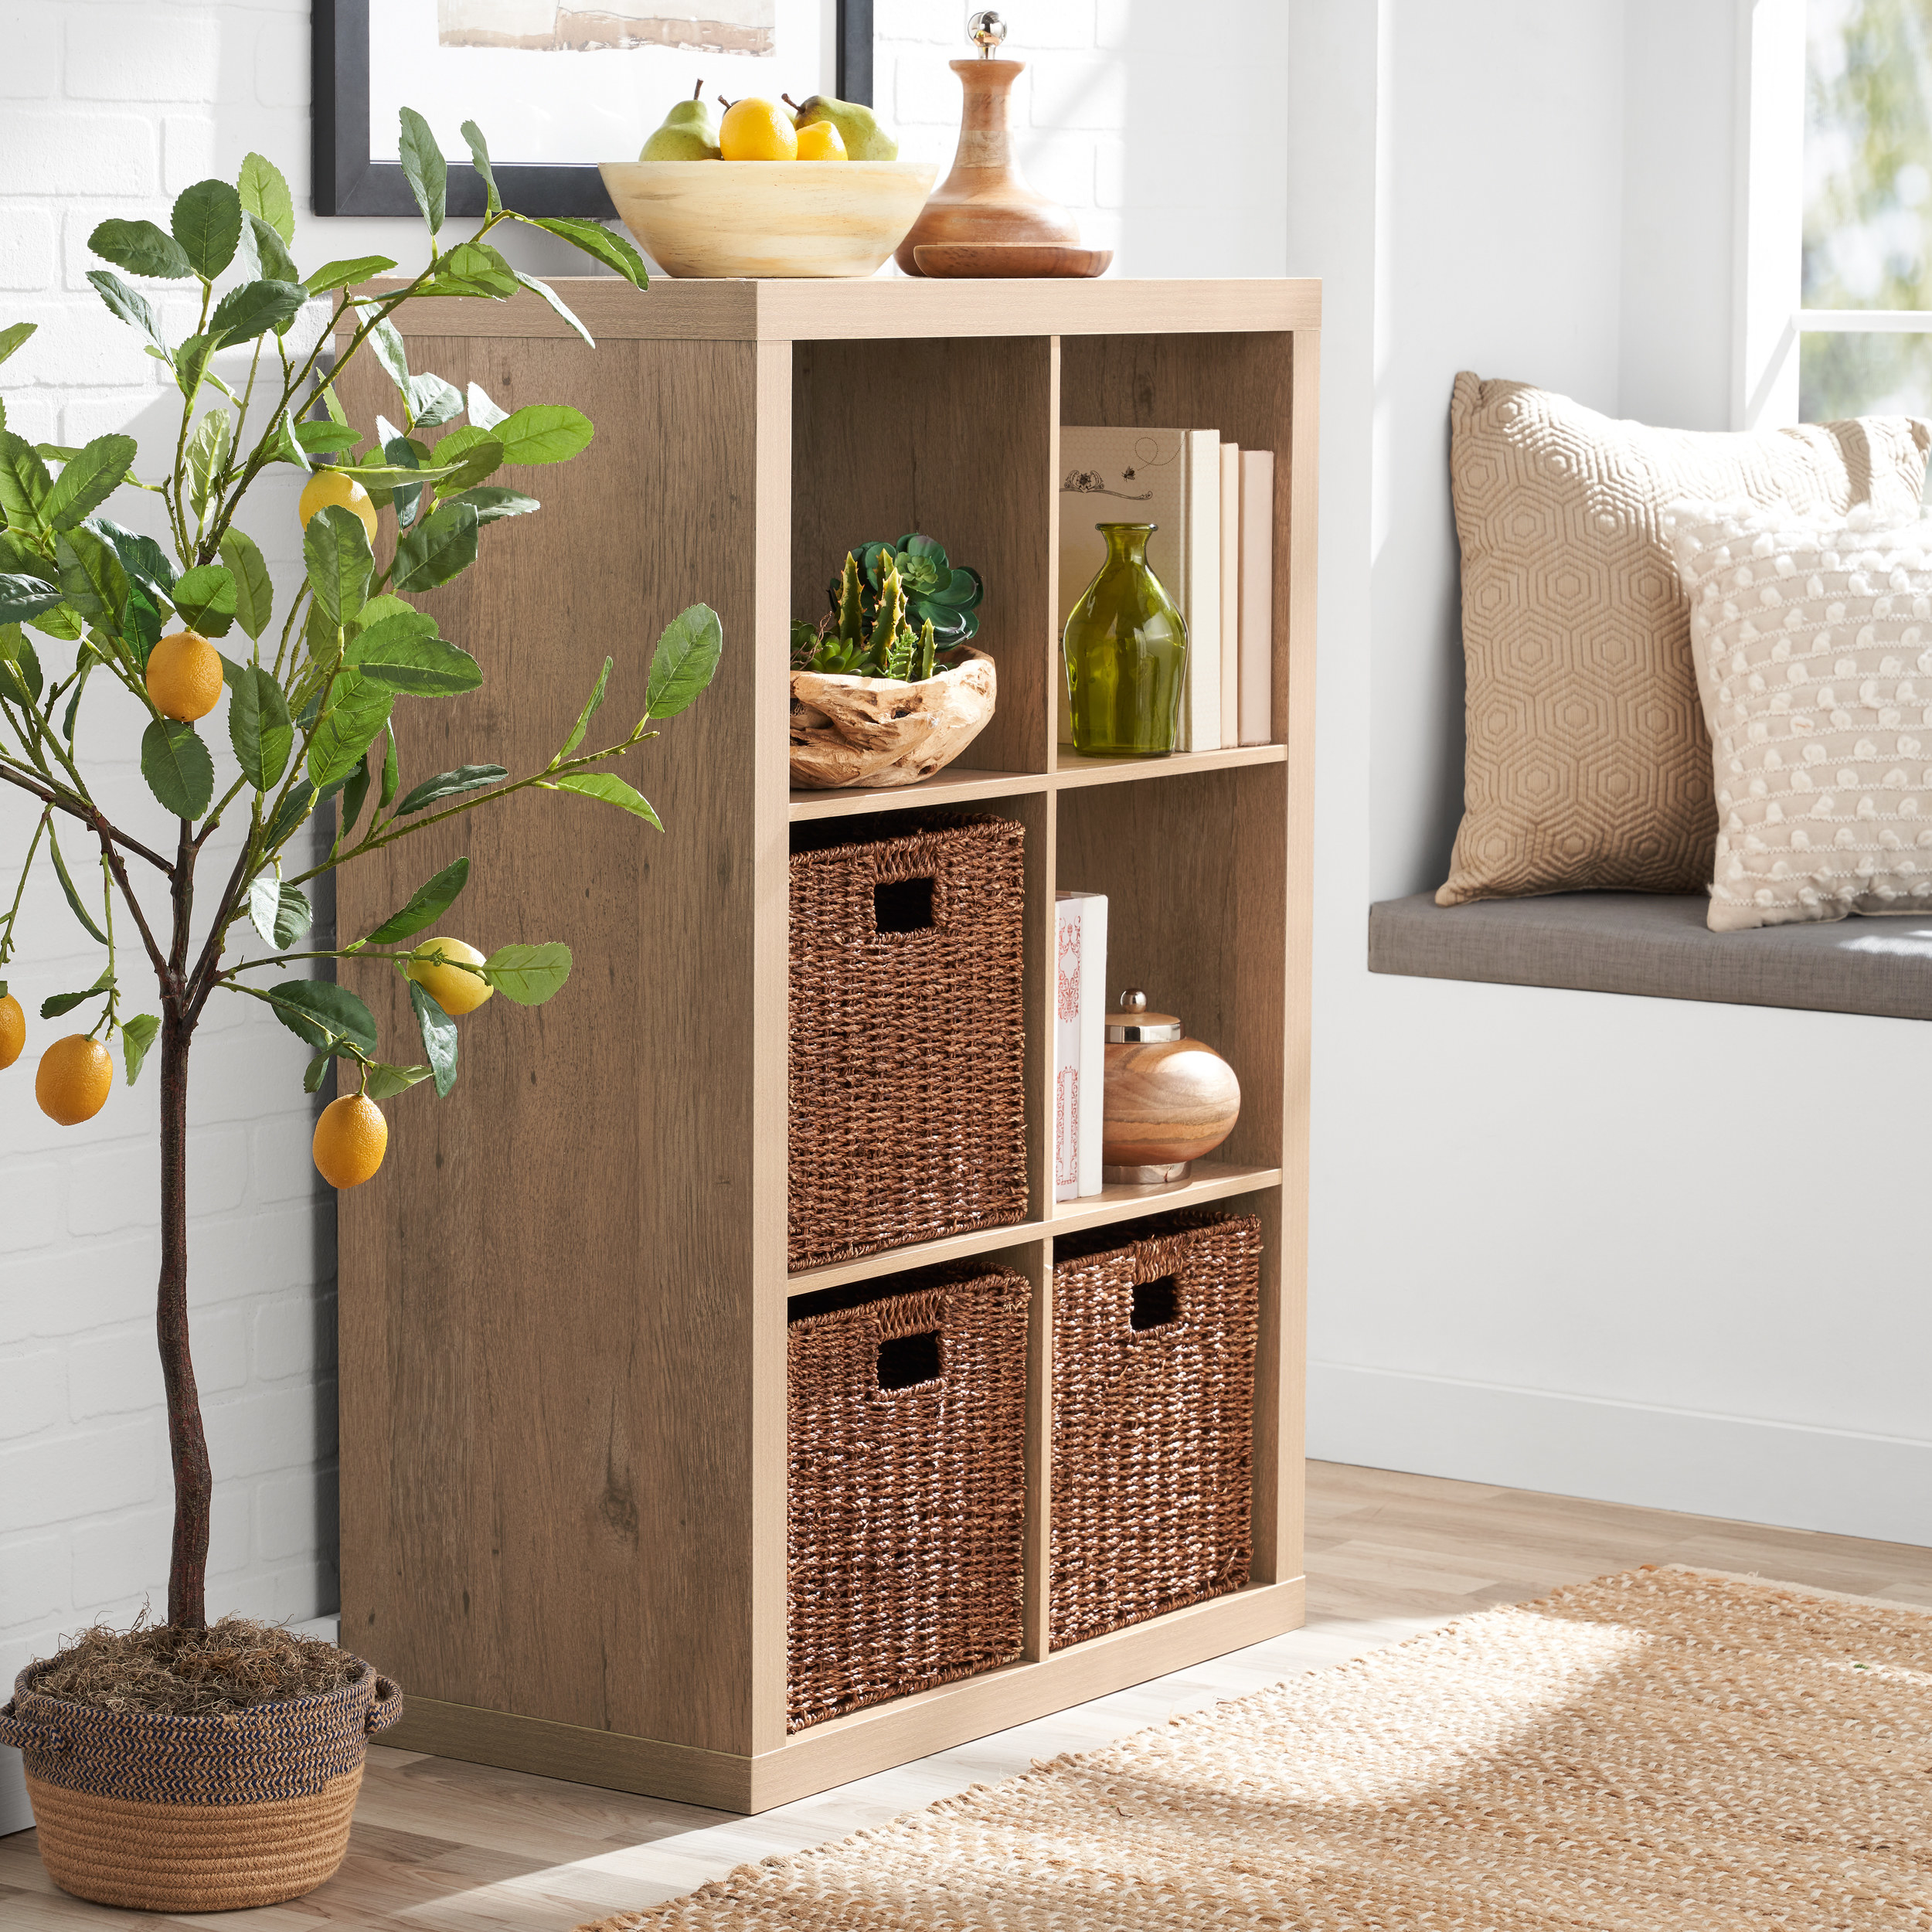 natural wood colored organizer with books and storage bins inside